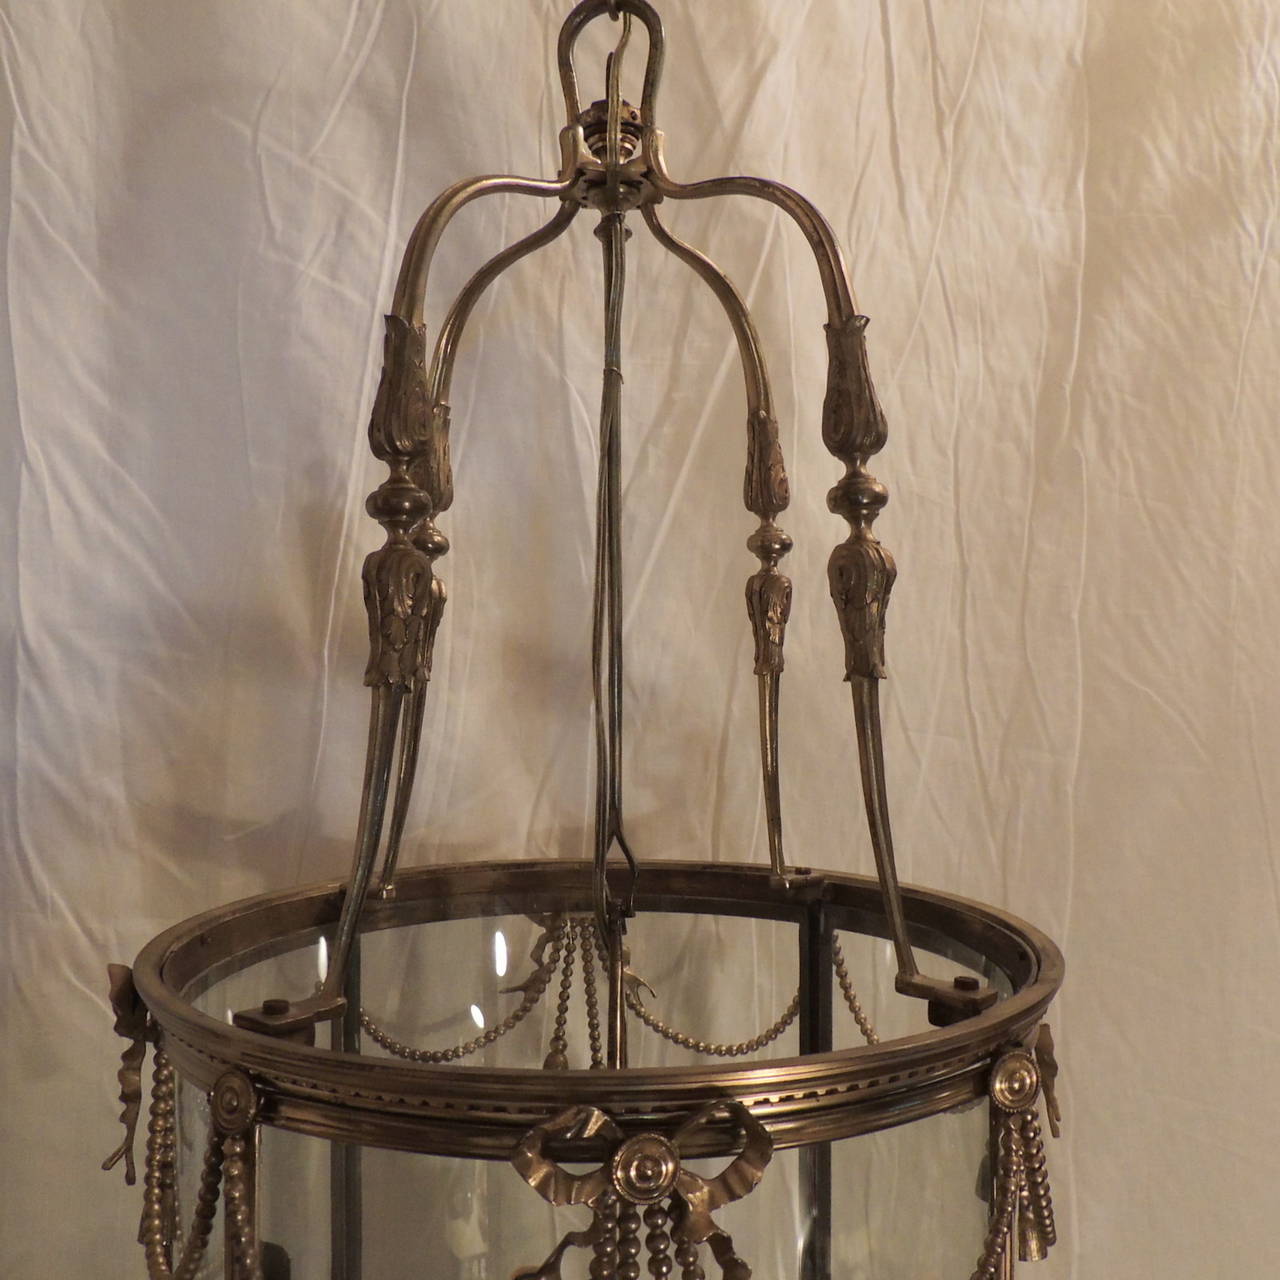 Mid-20th Century French Ormolu Bronze Large Bow, Ribbon and Tassel -Four Light Lantern with Door